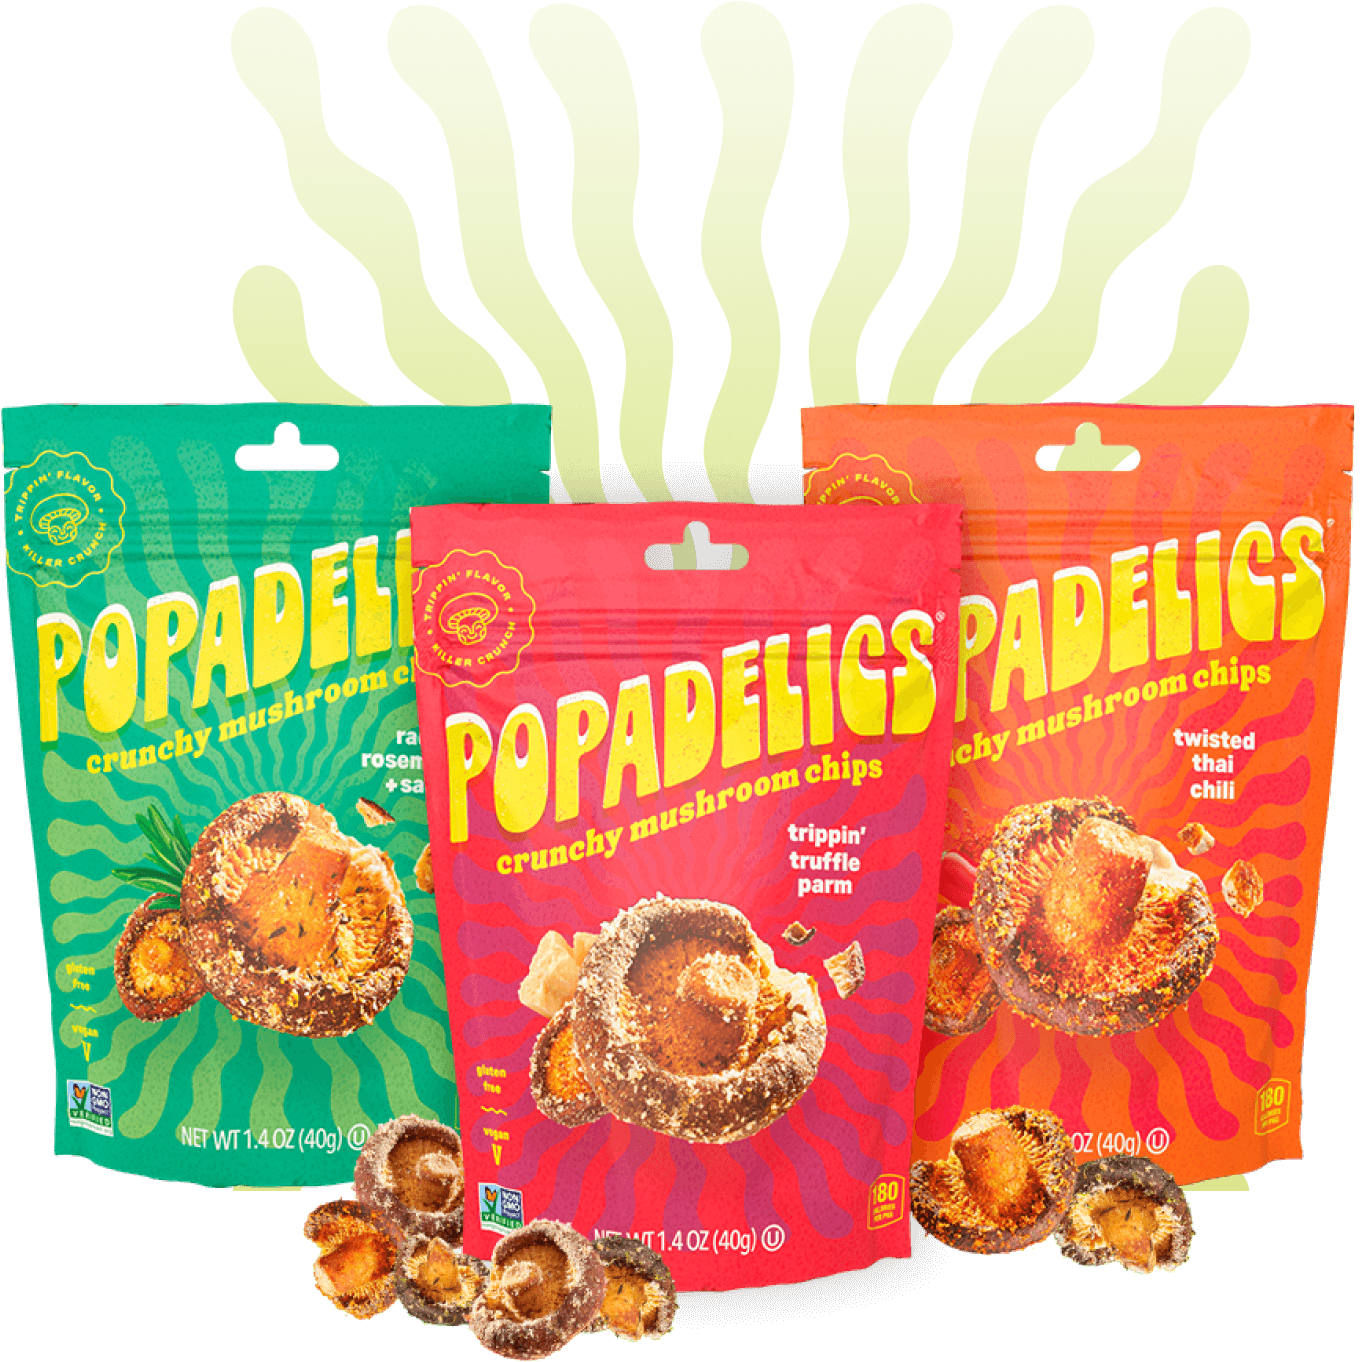 About Groupshop – Popadelics